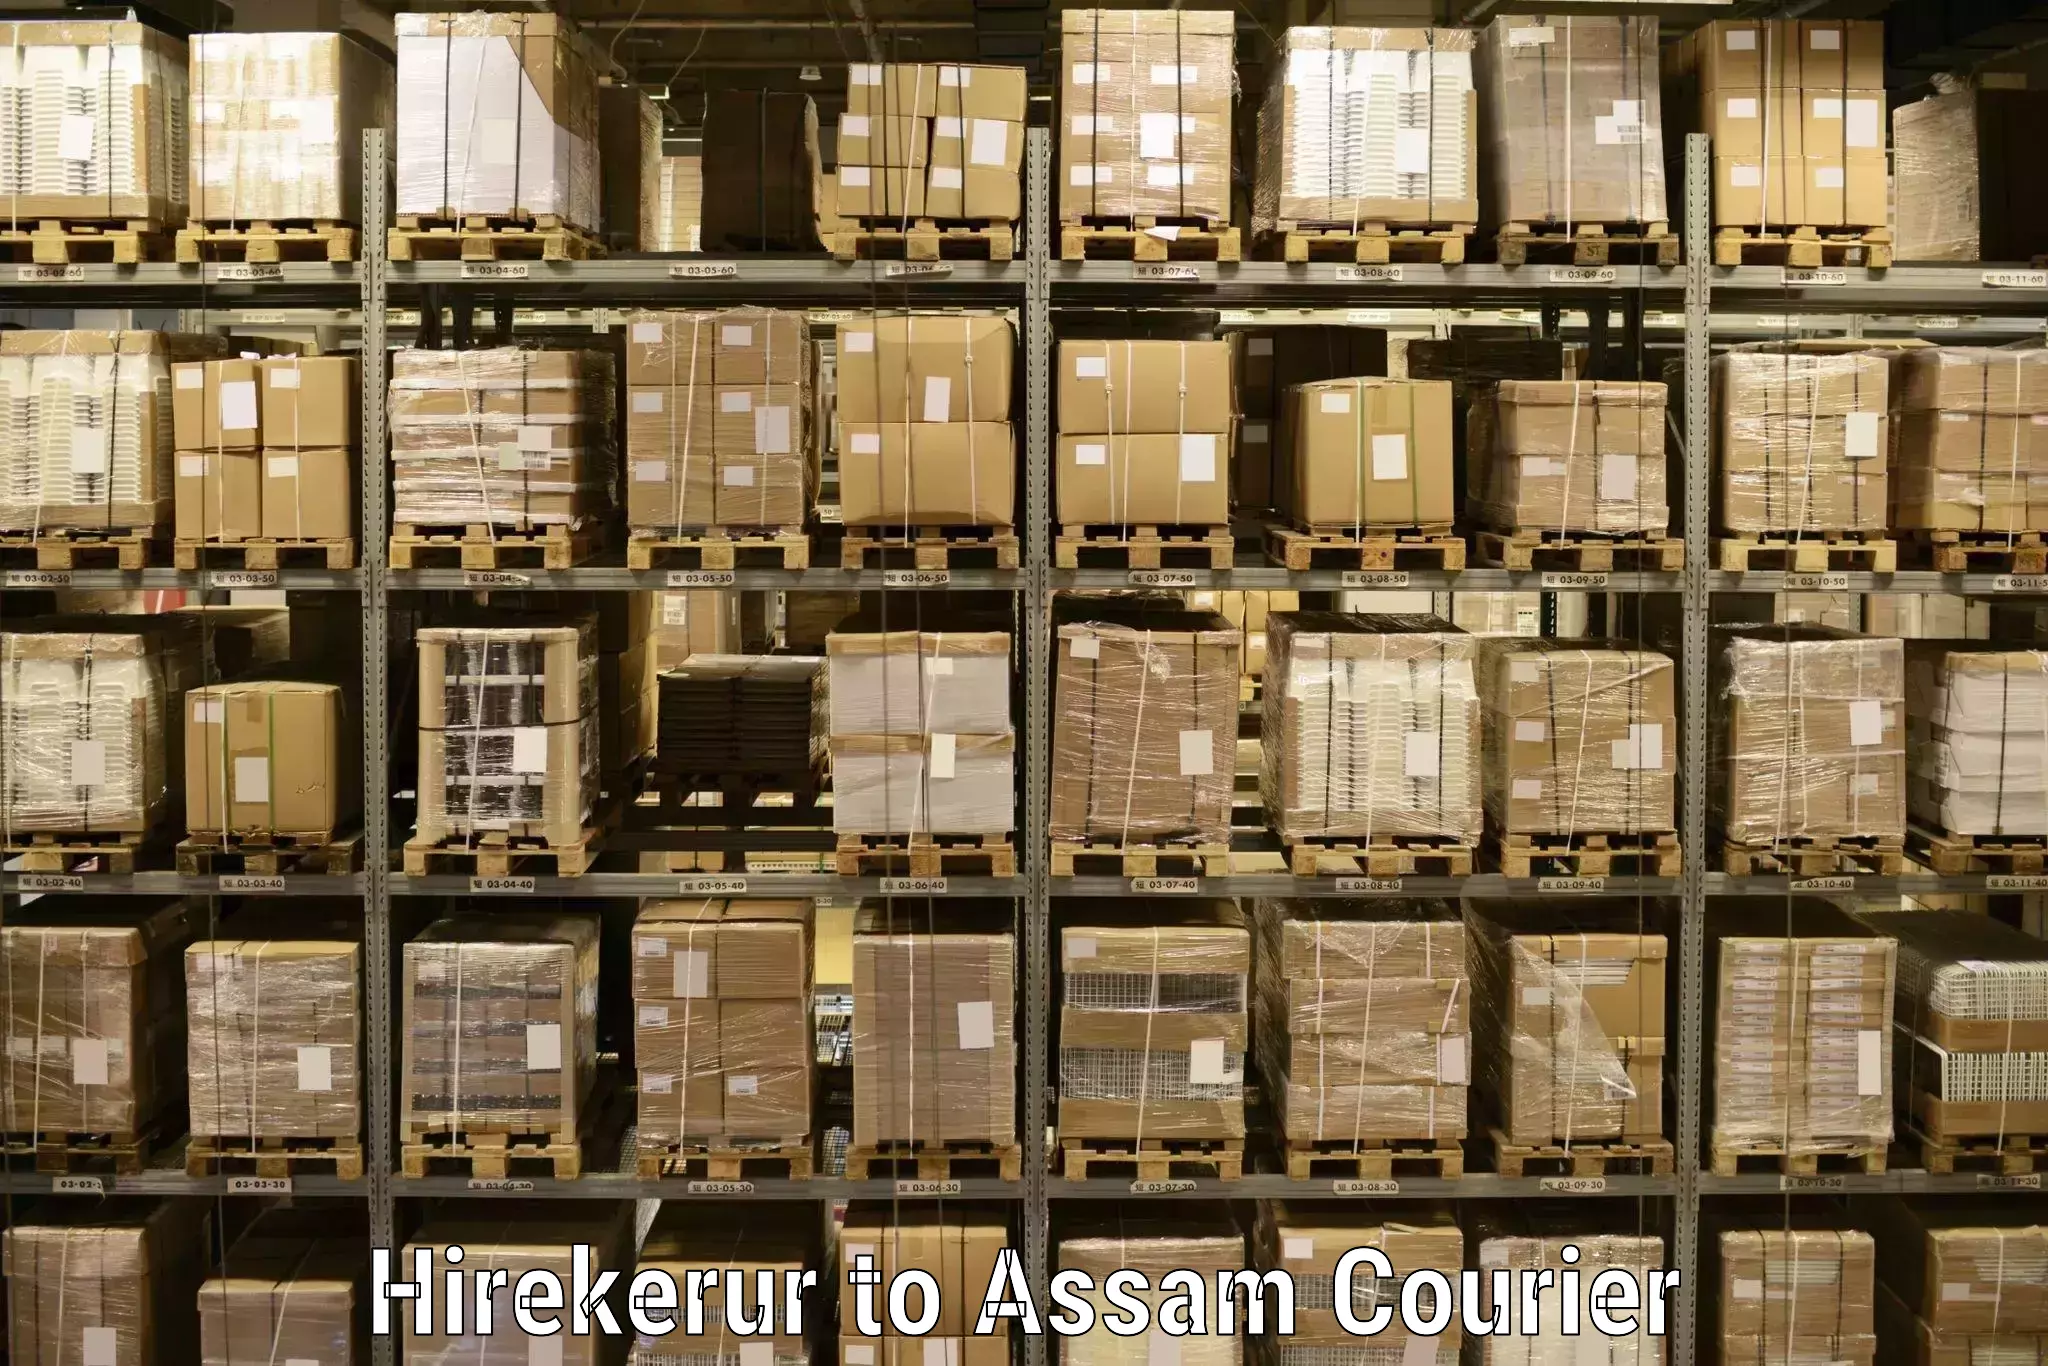 Quality courier partnerships in Hirekerur to Tezpur University